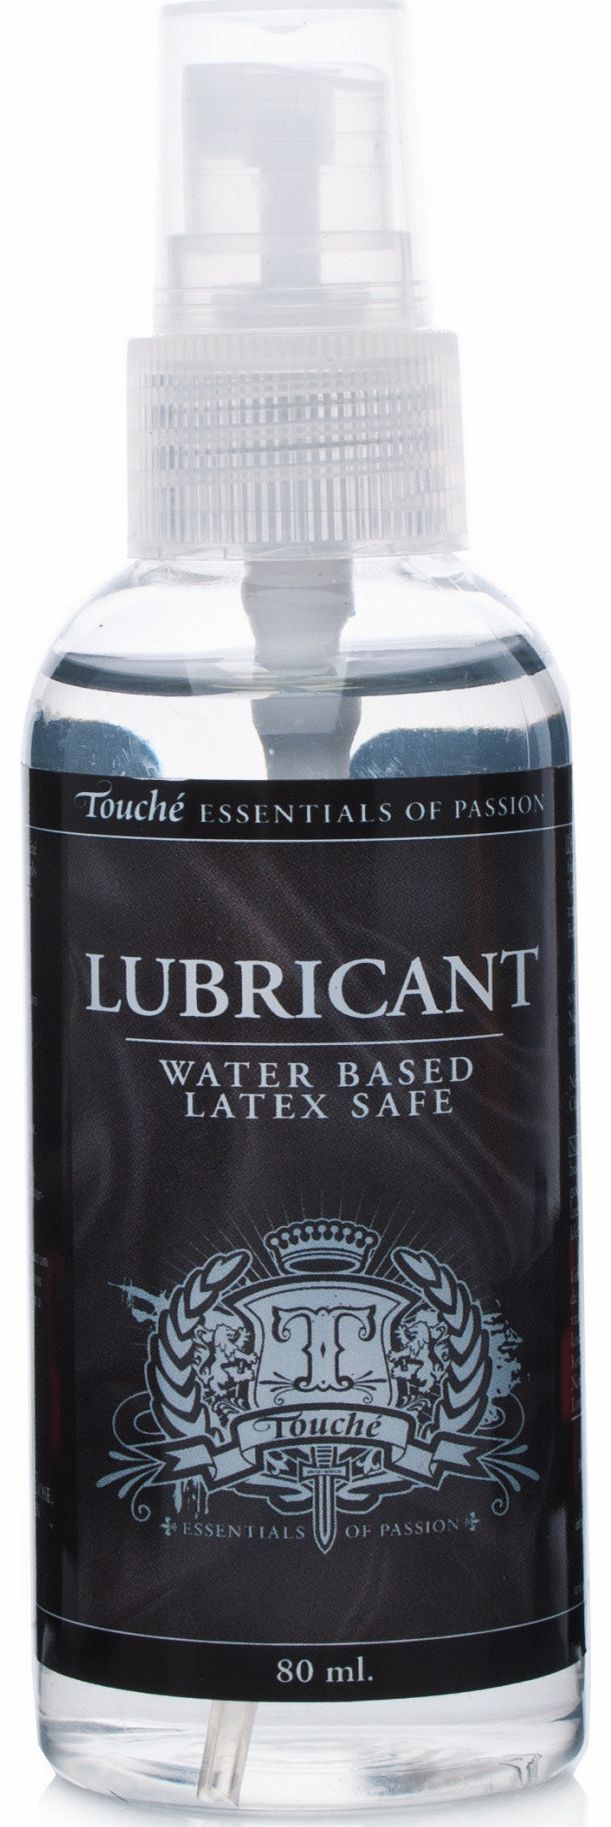 Lubricant Waterbased 80ml: This water based lube can be used with suitable sex toys and for body massages as well as penetration thanks to its compatibility with latex condoms. The dermatologically tested, fat-free, colourless and odourless gel is al